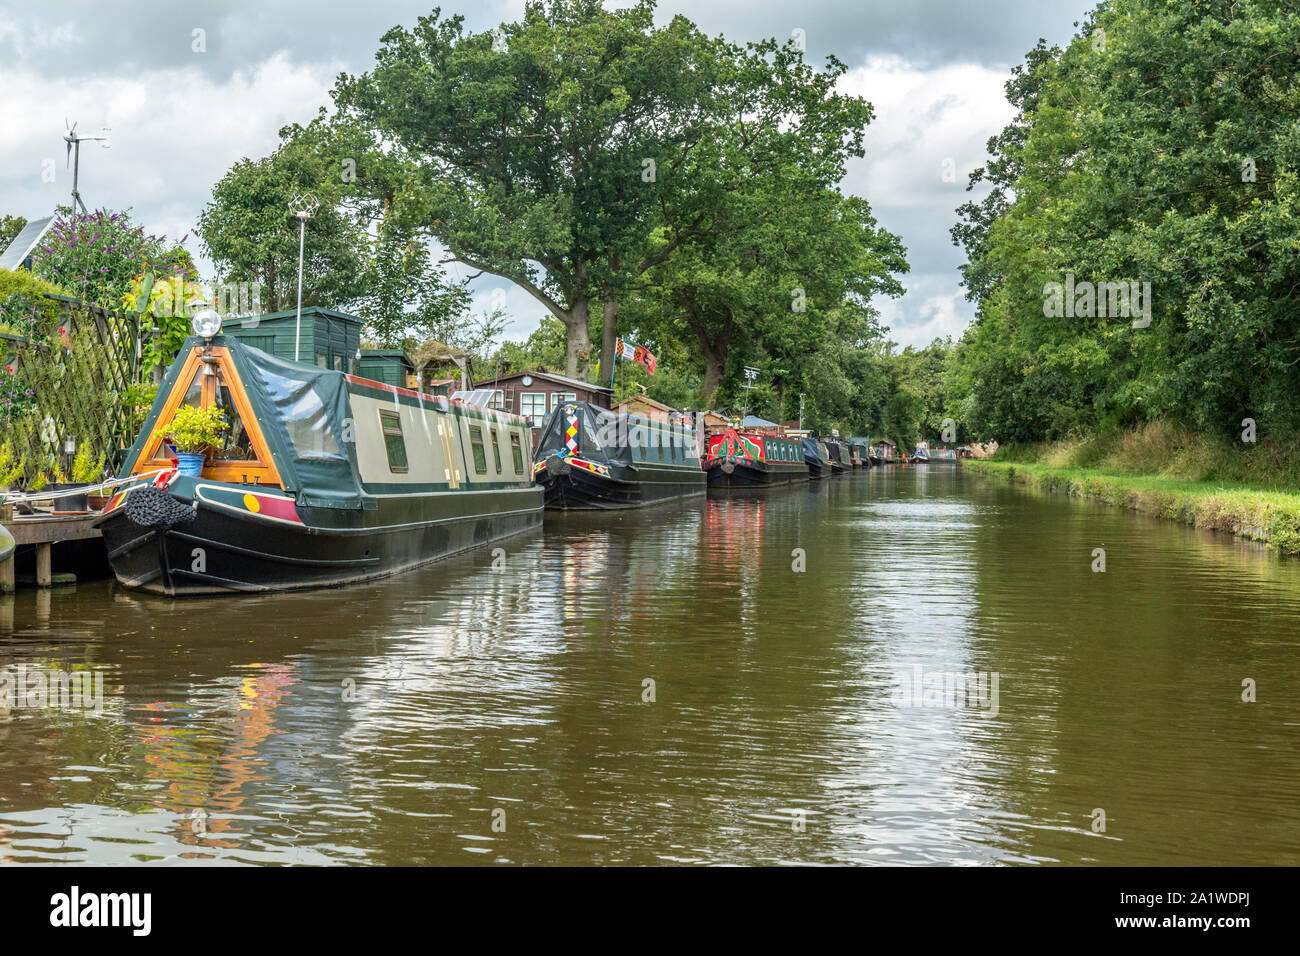 Narrow Boats, or Barges, moored up on The Shropshire Union Canal in England. Stock Photo